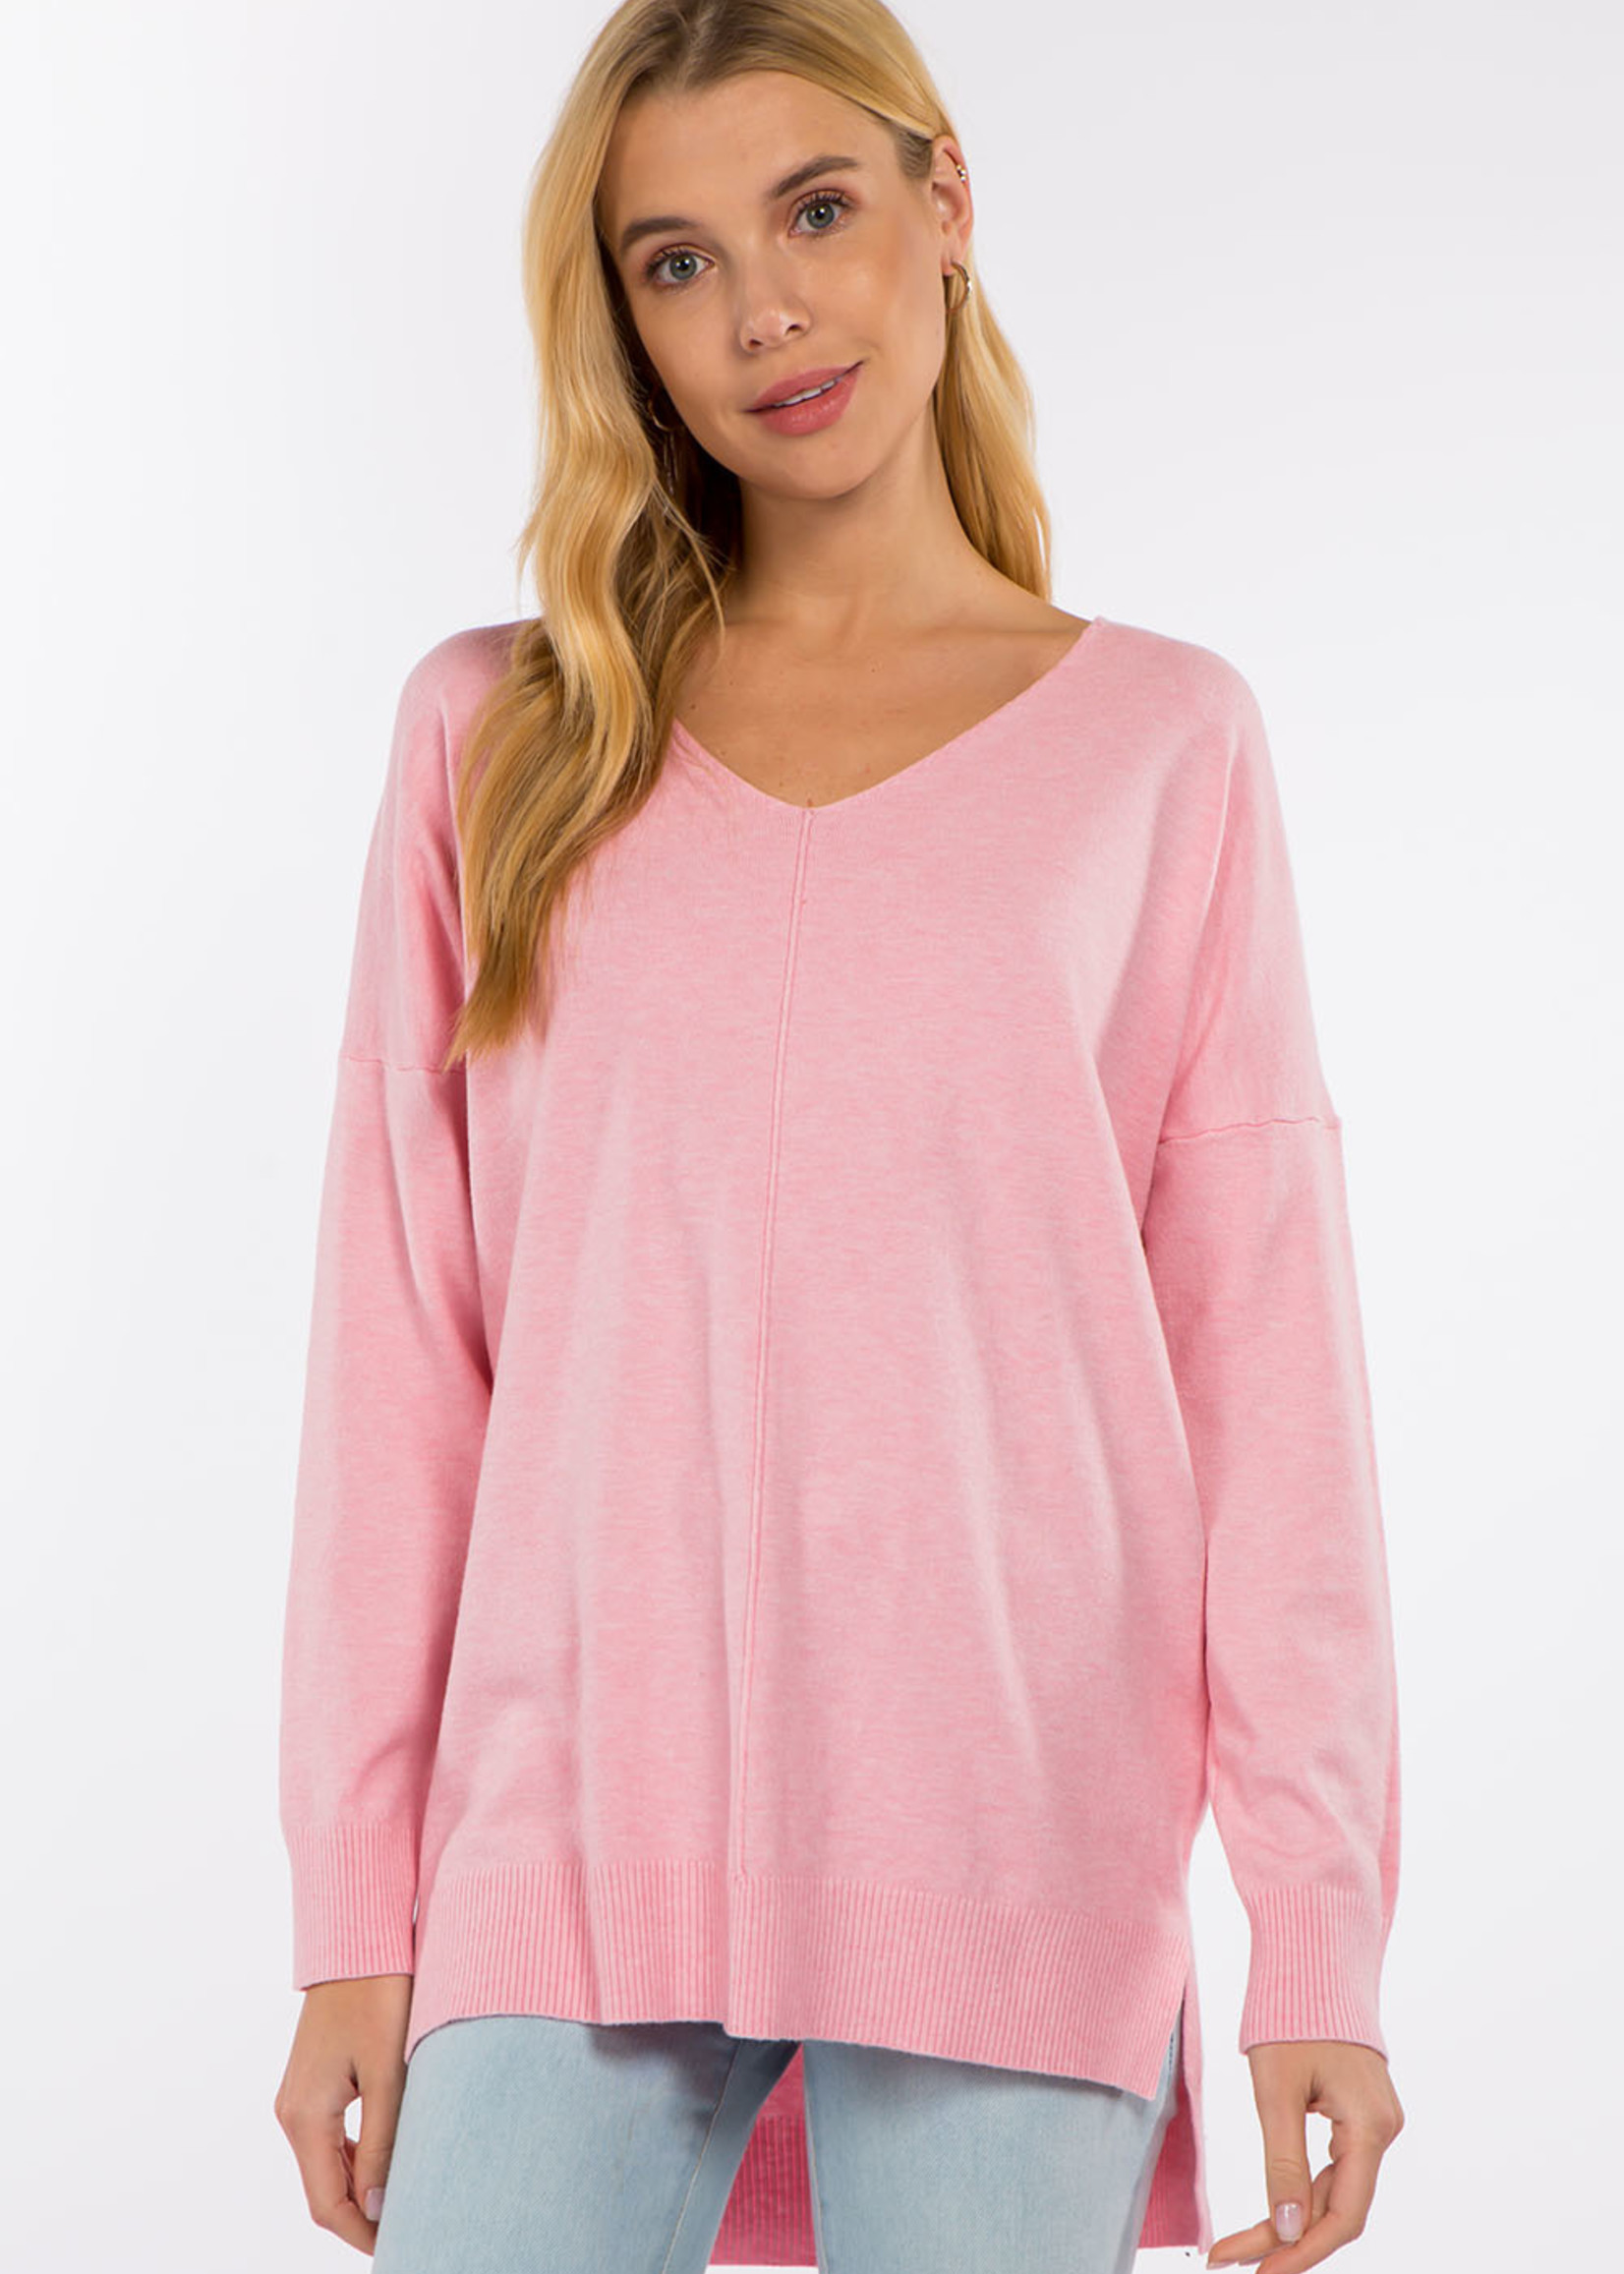 dreamers by debut Pink V-Neck Sweater